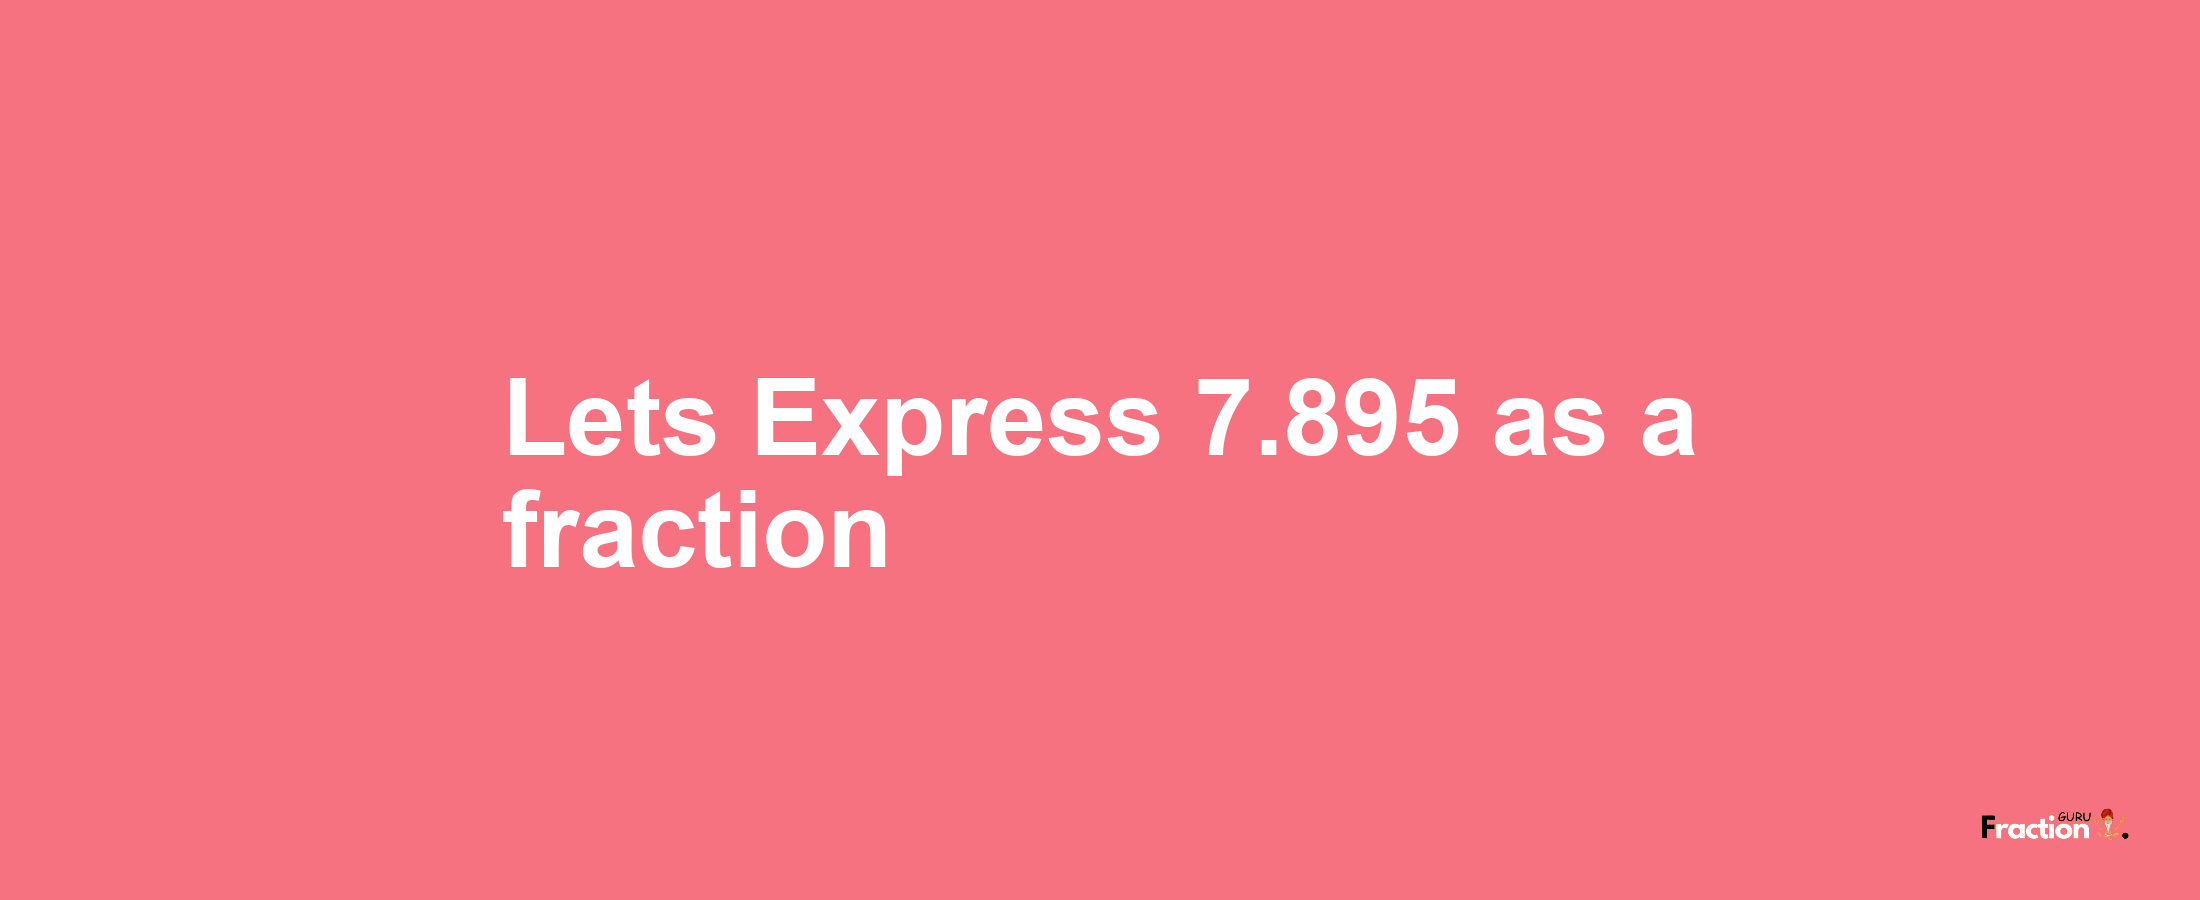 Lets Express 7.895 as afraction